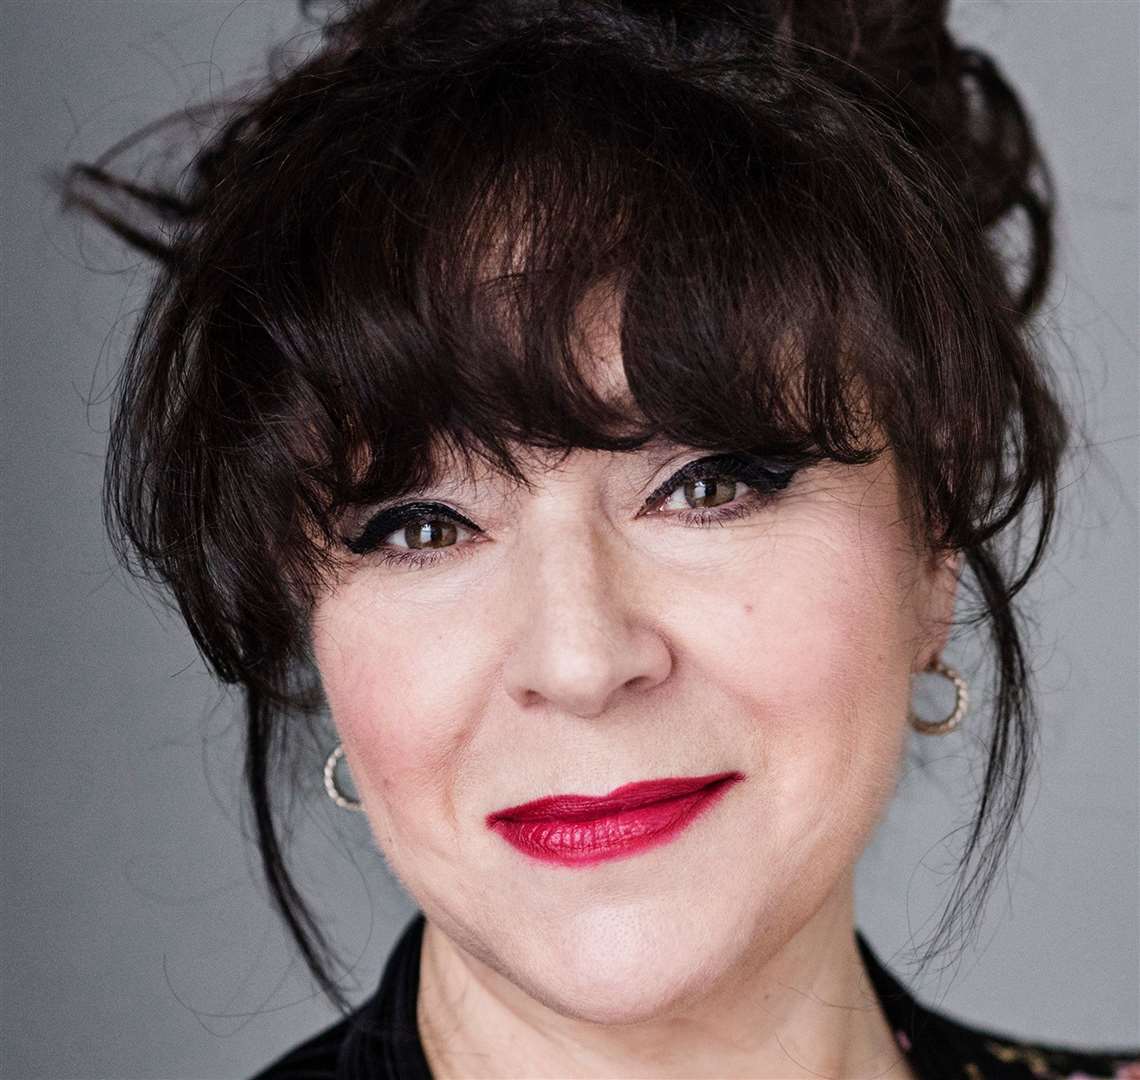 Ab Fab star Harriet Thorpe joins the cast of Steel Magnolias. Picture: Neil Reading PR